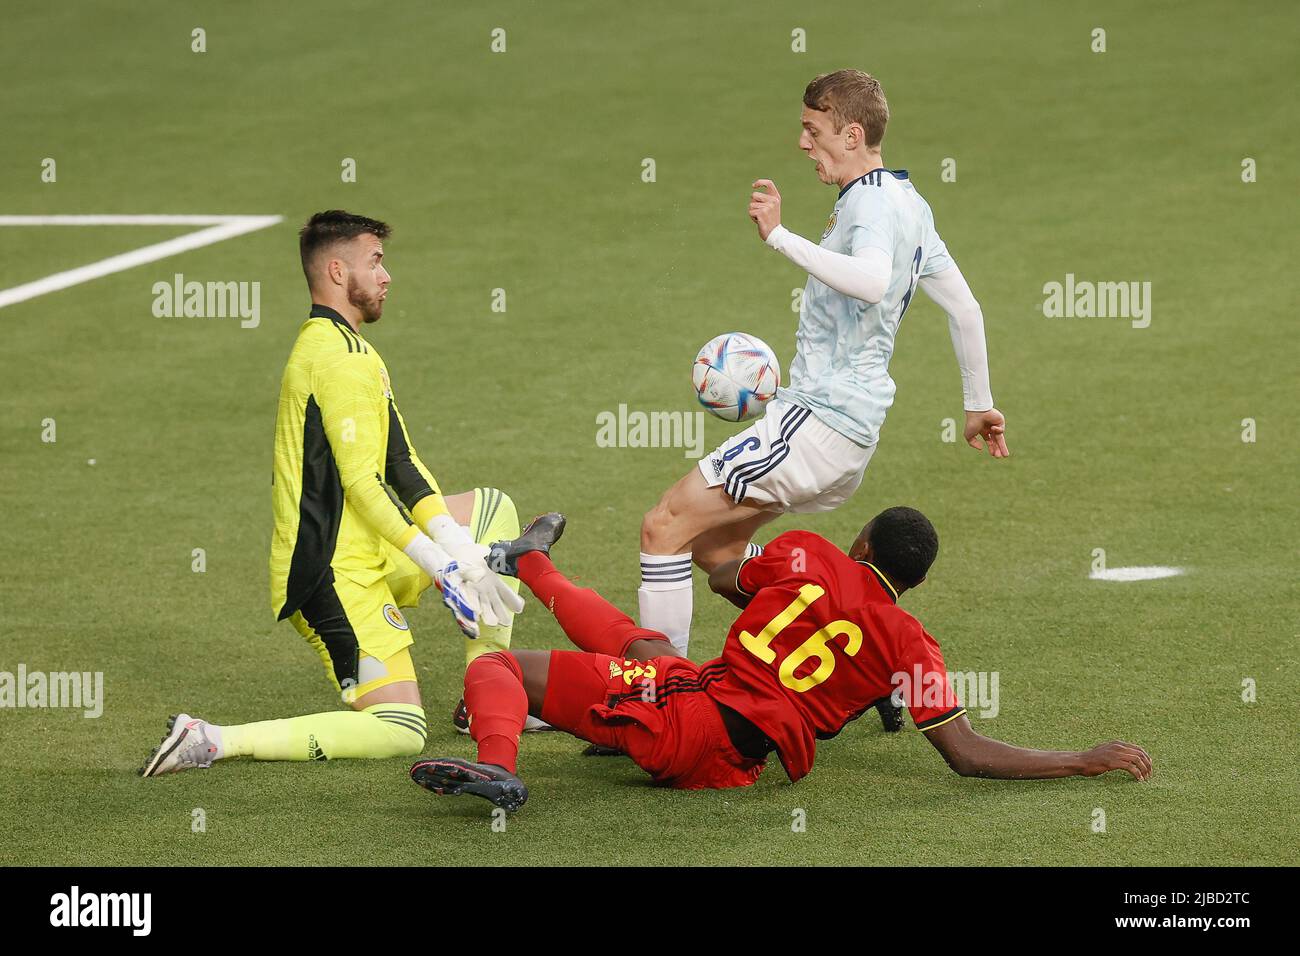 Scotland's goalkeeper Ross Sinclair, Scotland's Tom Clayton and Belgium's Ken Nkuba fight for the ball during a soccer game between the U21 teams of Belgium and Scotland, Sunday 05 June 2022 in Sint-Truiden, the last qualification match (out of 8) in the group I, for the 2023 Under-21 European Championships. BELGA PHOTO BRUNO FAHY Stock Photo